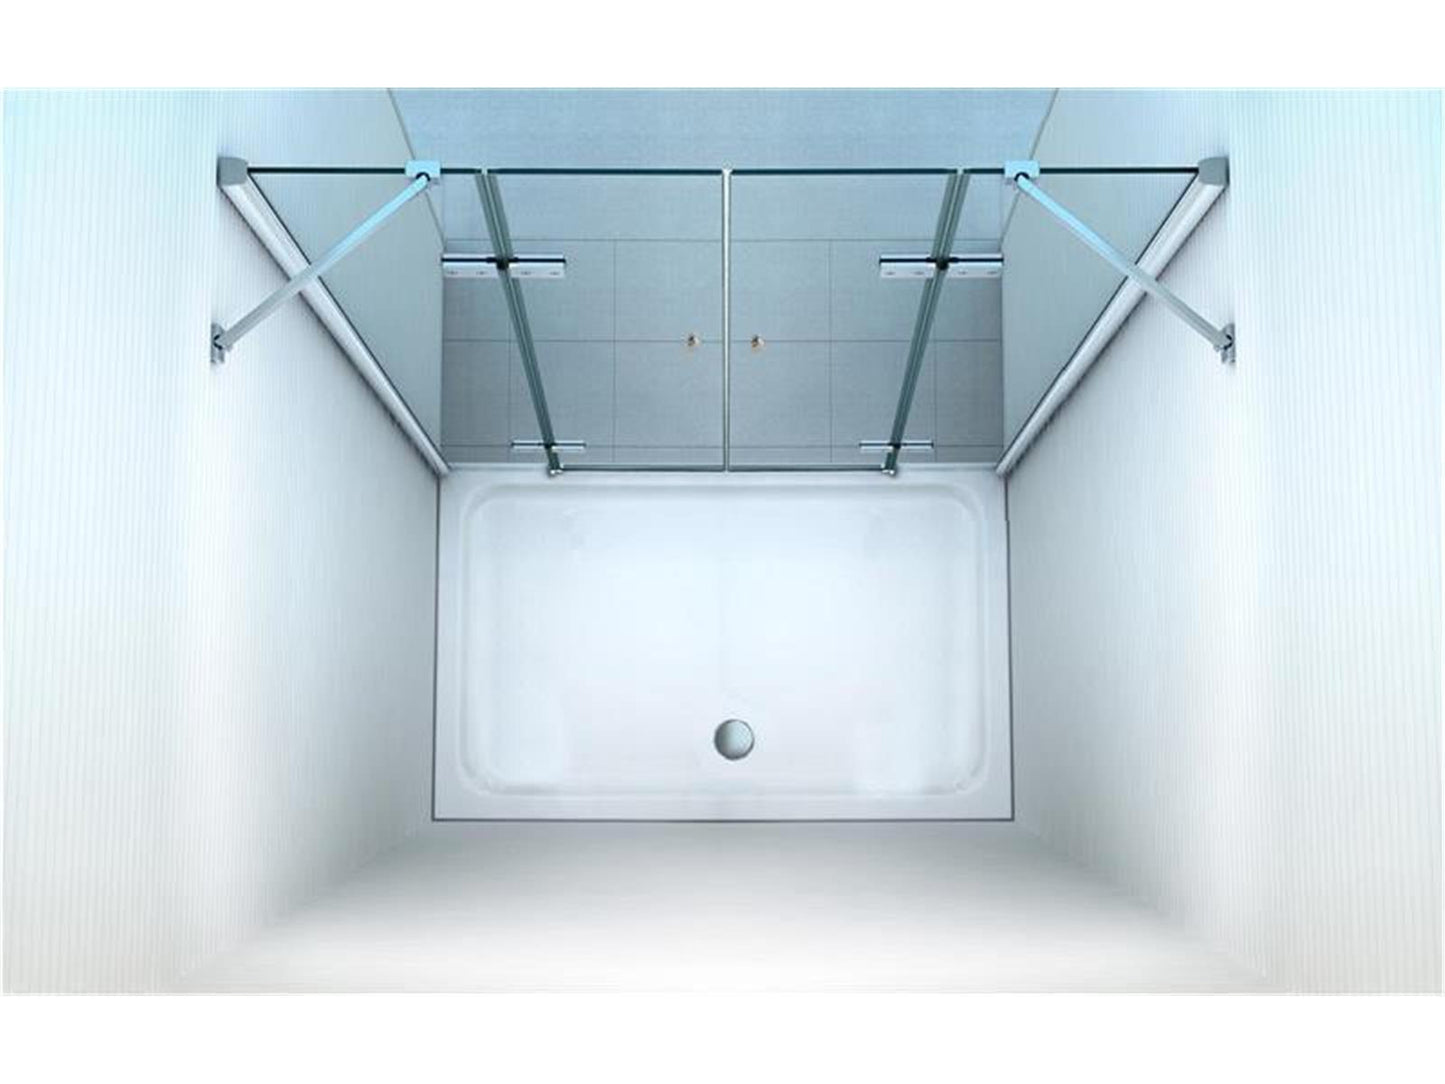 GlasHomeCenter - Utah niche cabin (155 x 195 cm) - 8mm toughened safety glass - without shower tray